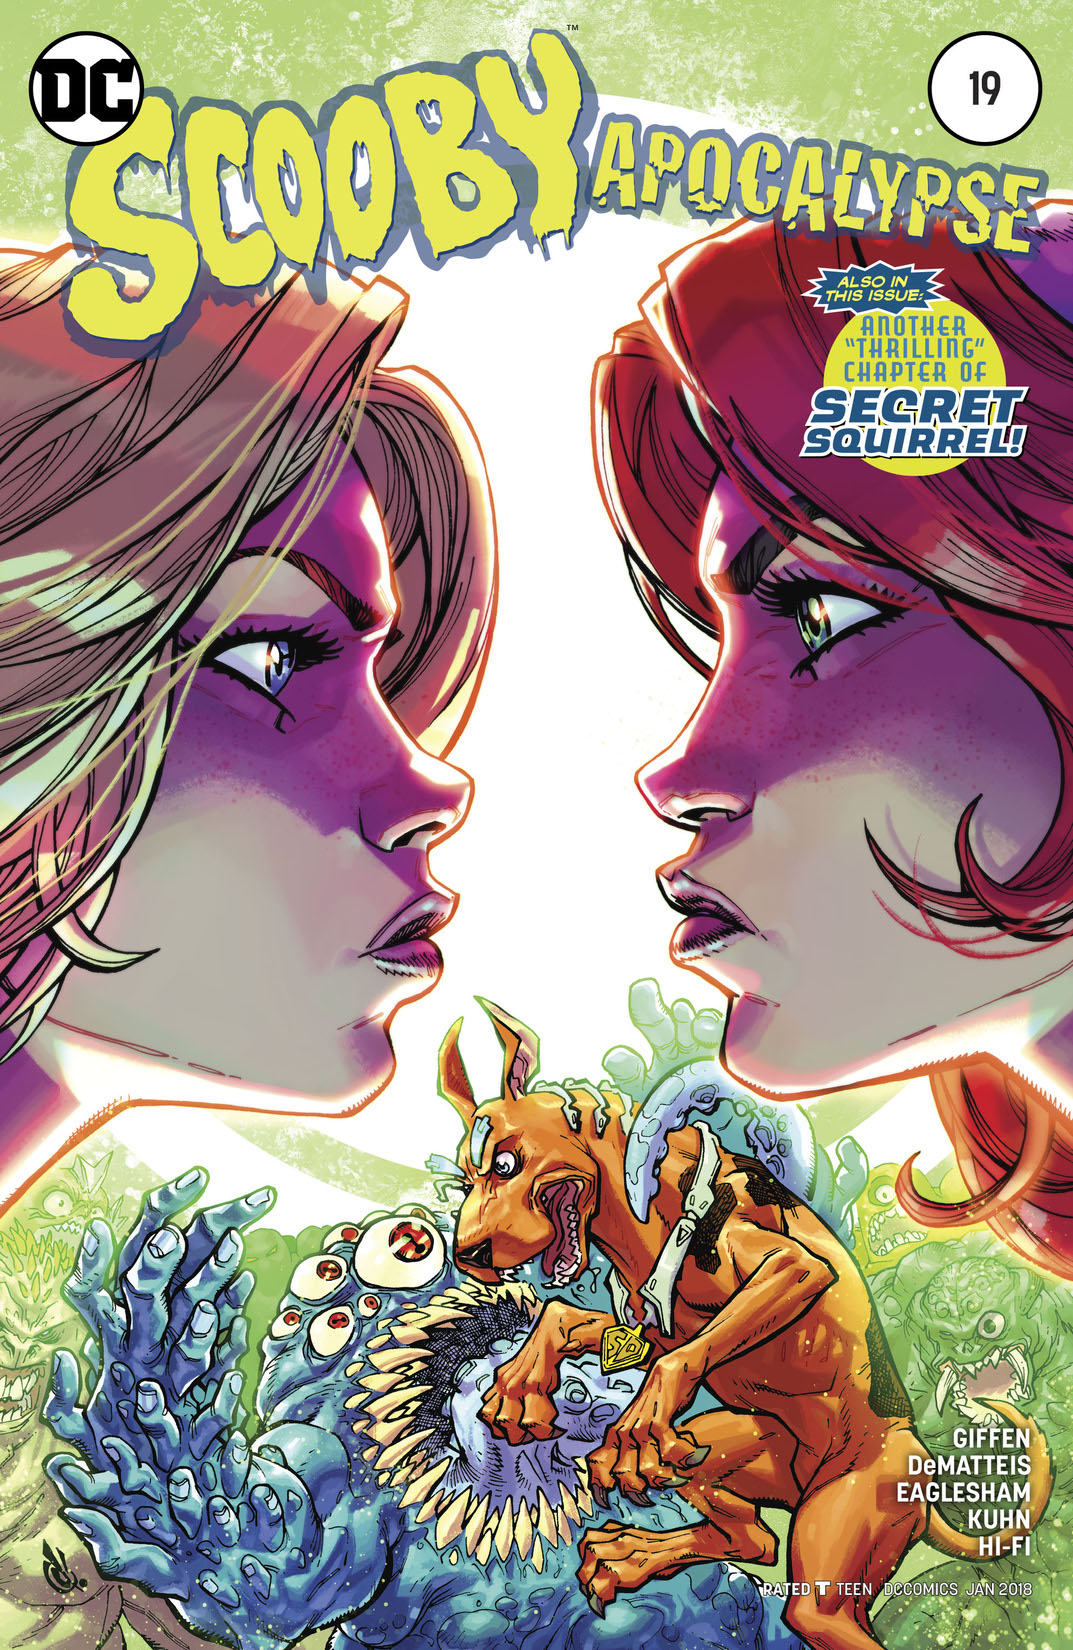 Scooby Apocalypse #19 preview images